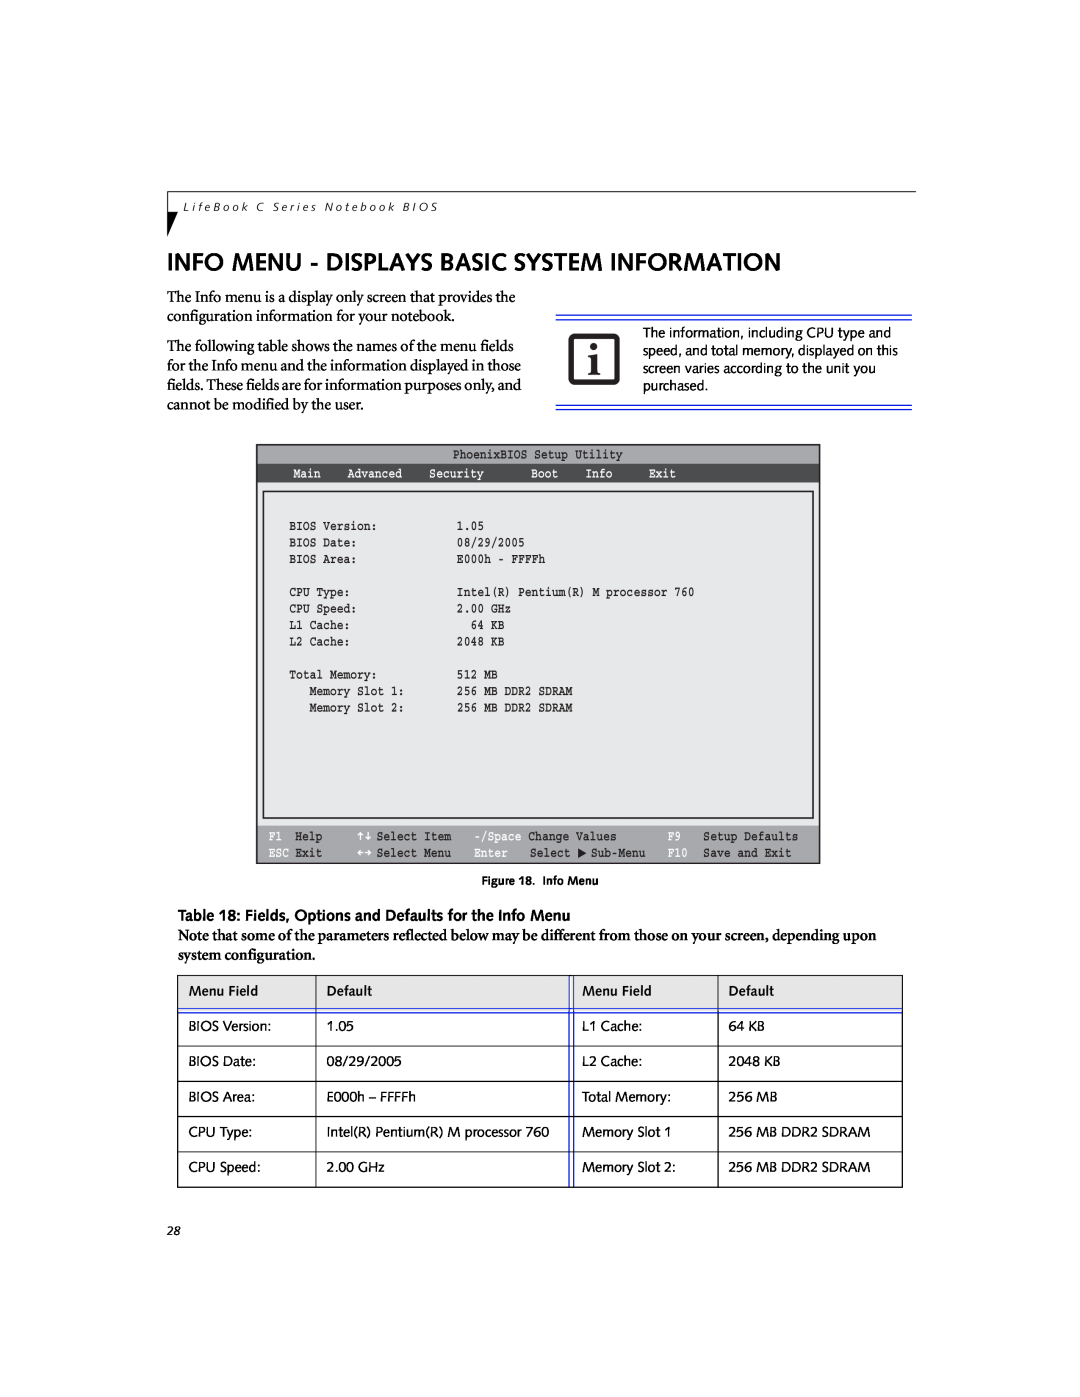 Fujitsu C1320D manual Info Menu - Displays Basic System Information, Fields, Options and Defaults for the Info Menu 